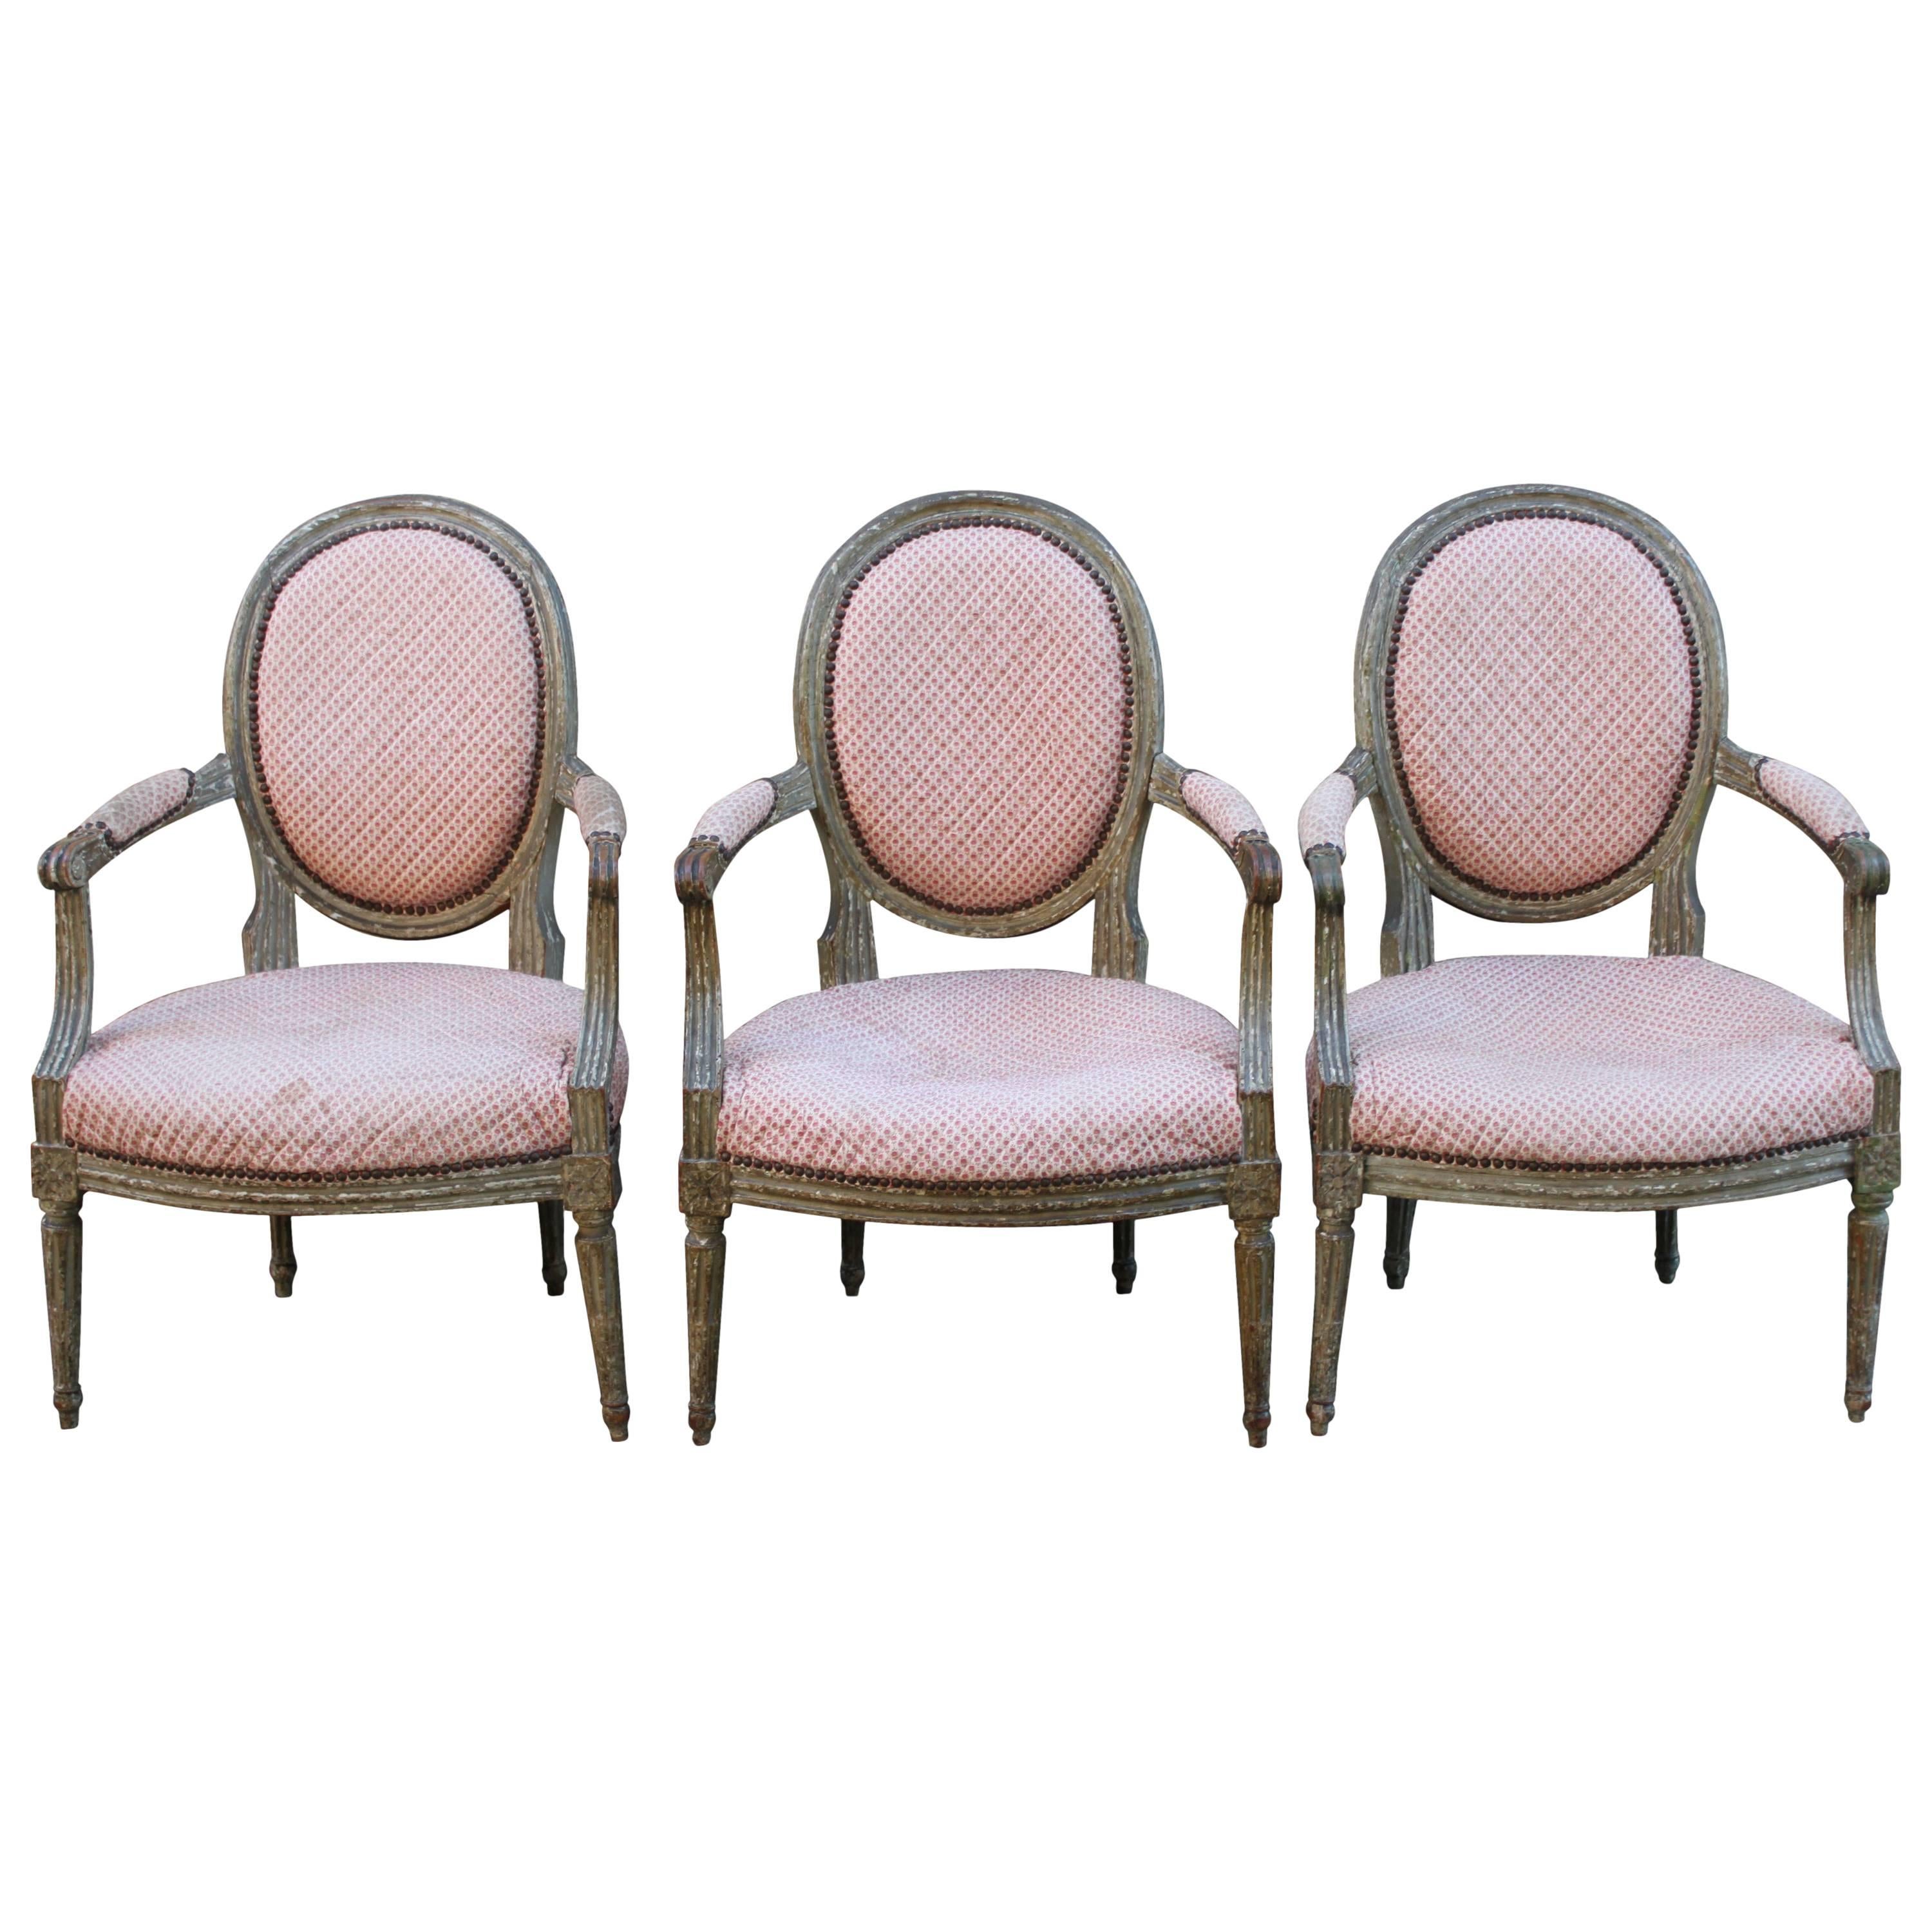 Set of Three Period Louis XVI Painted Fauteuils, France, Late 18th Century